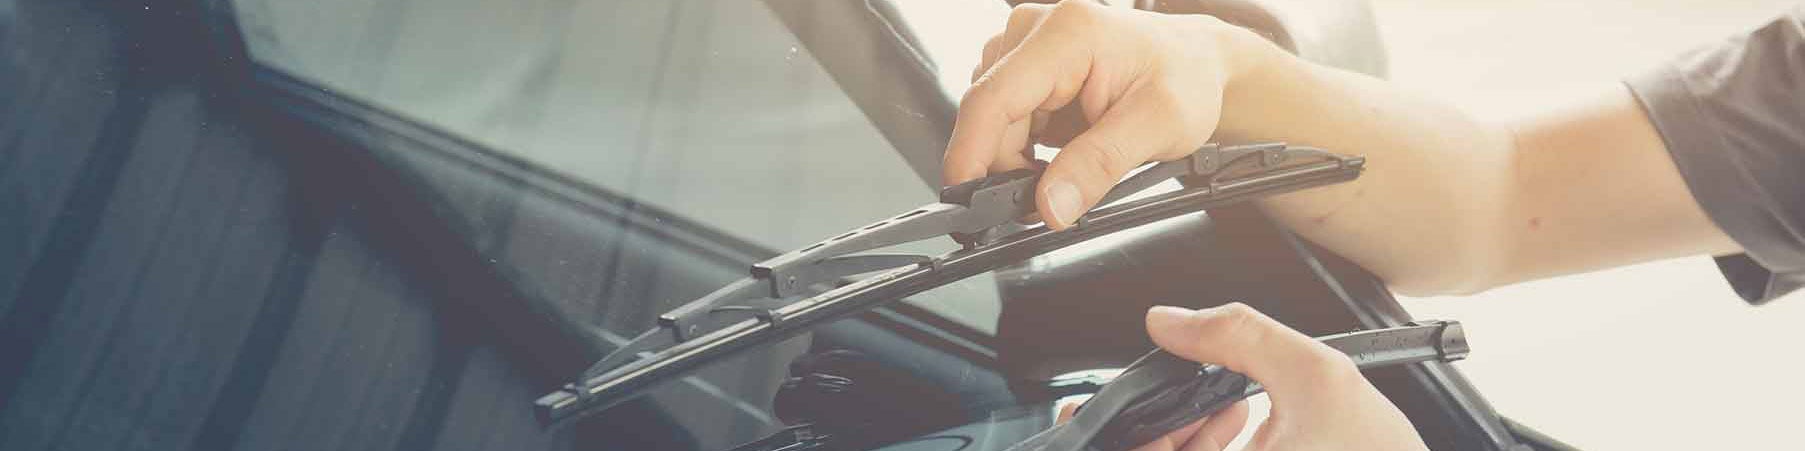 Windshield Wiper Replacement Near You